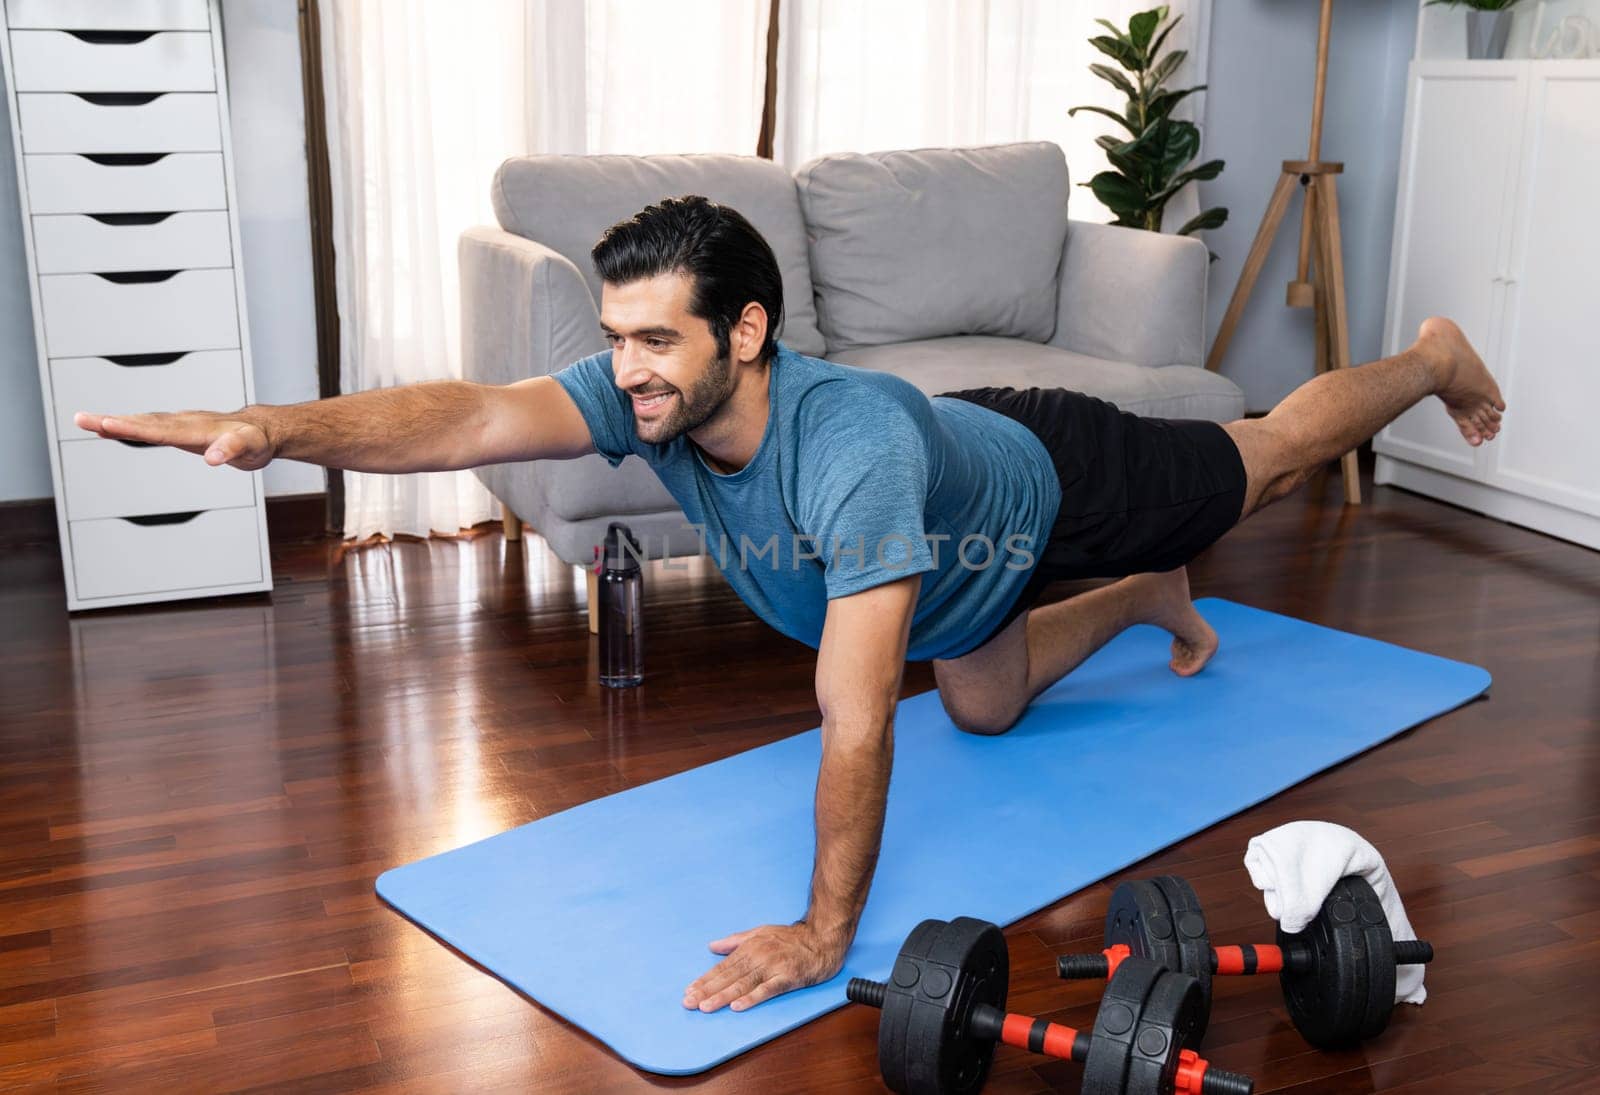 Flexible and dexterity man in sportswear doing yoga position in meditation posture on exercising mat at home. Healthy gaiety home yoga lifestyle with peaceful mind and serenity.